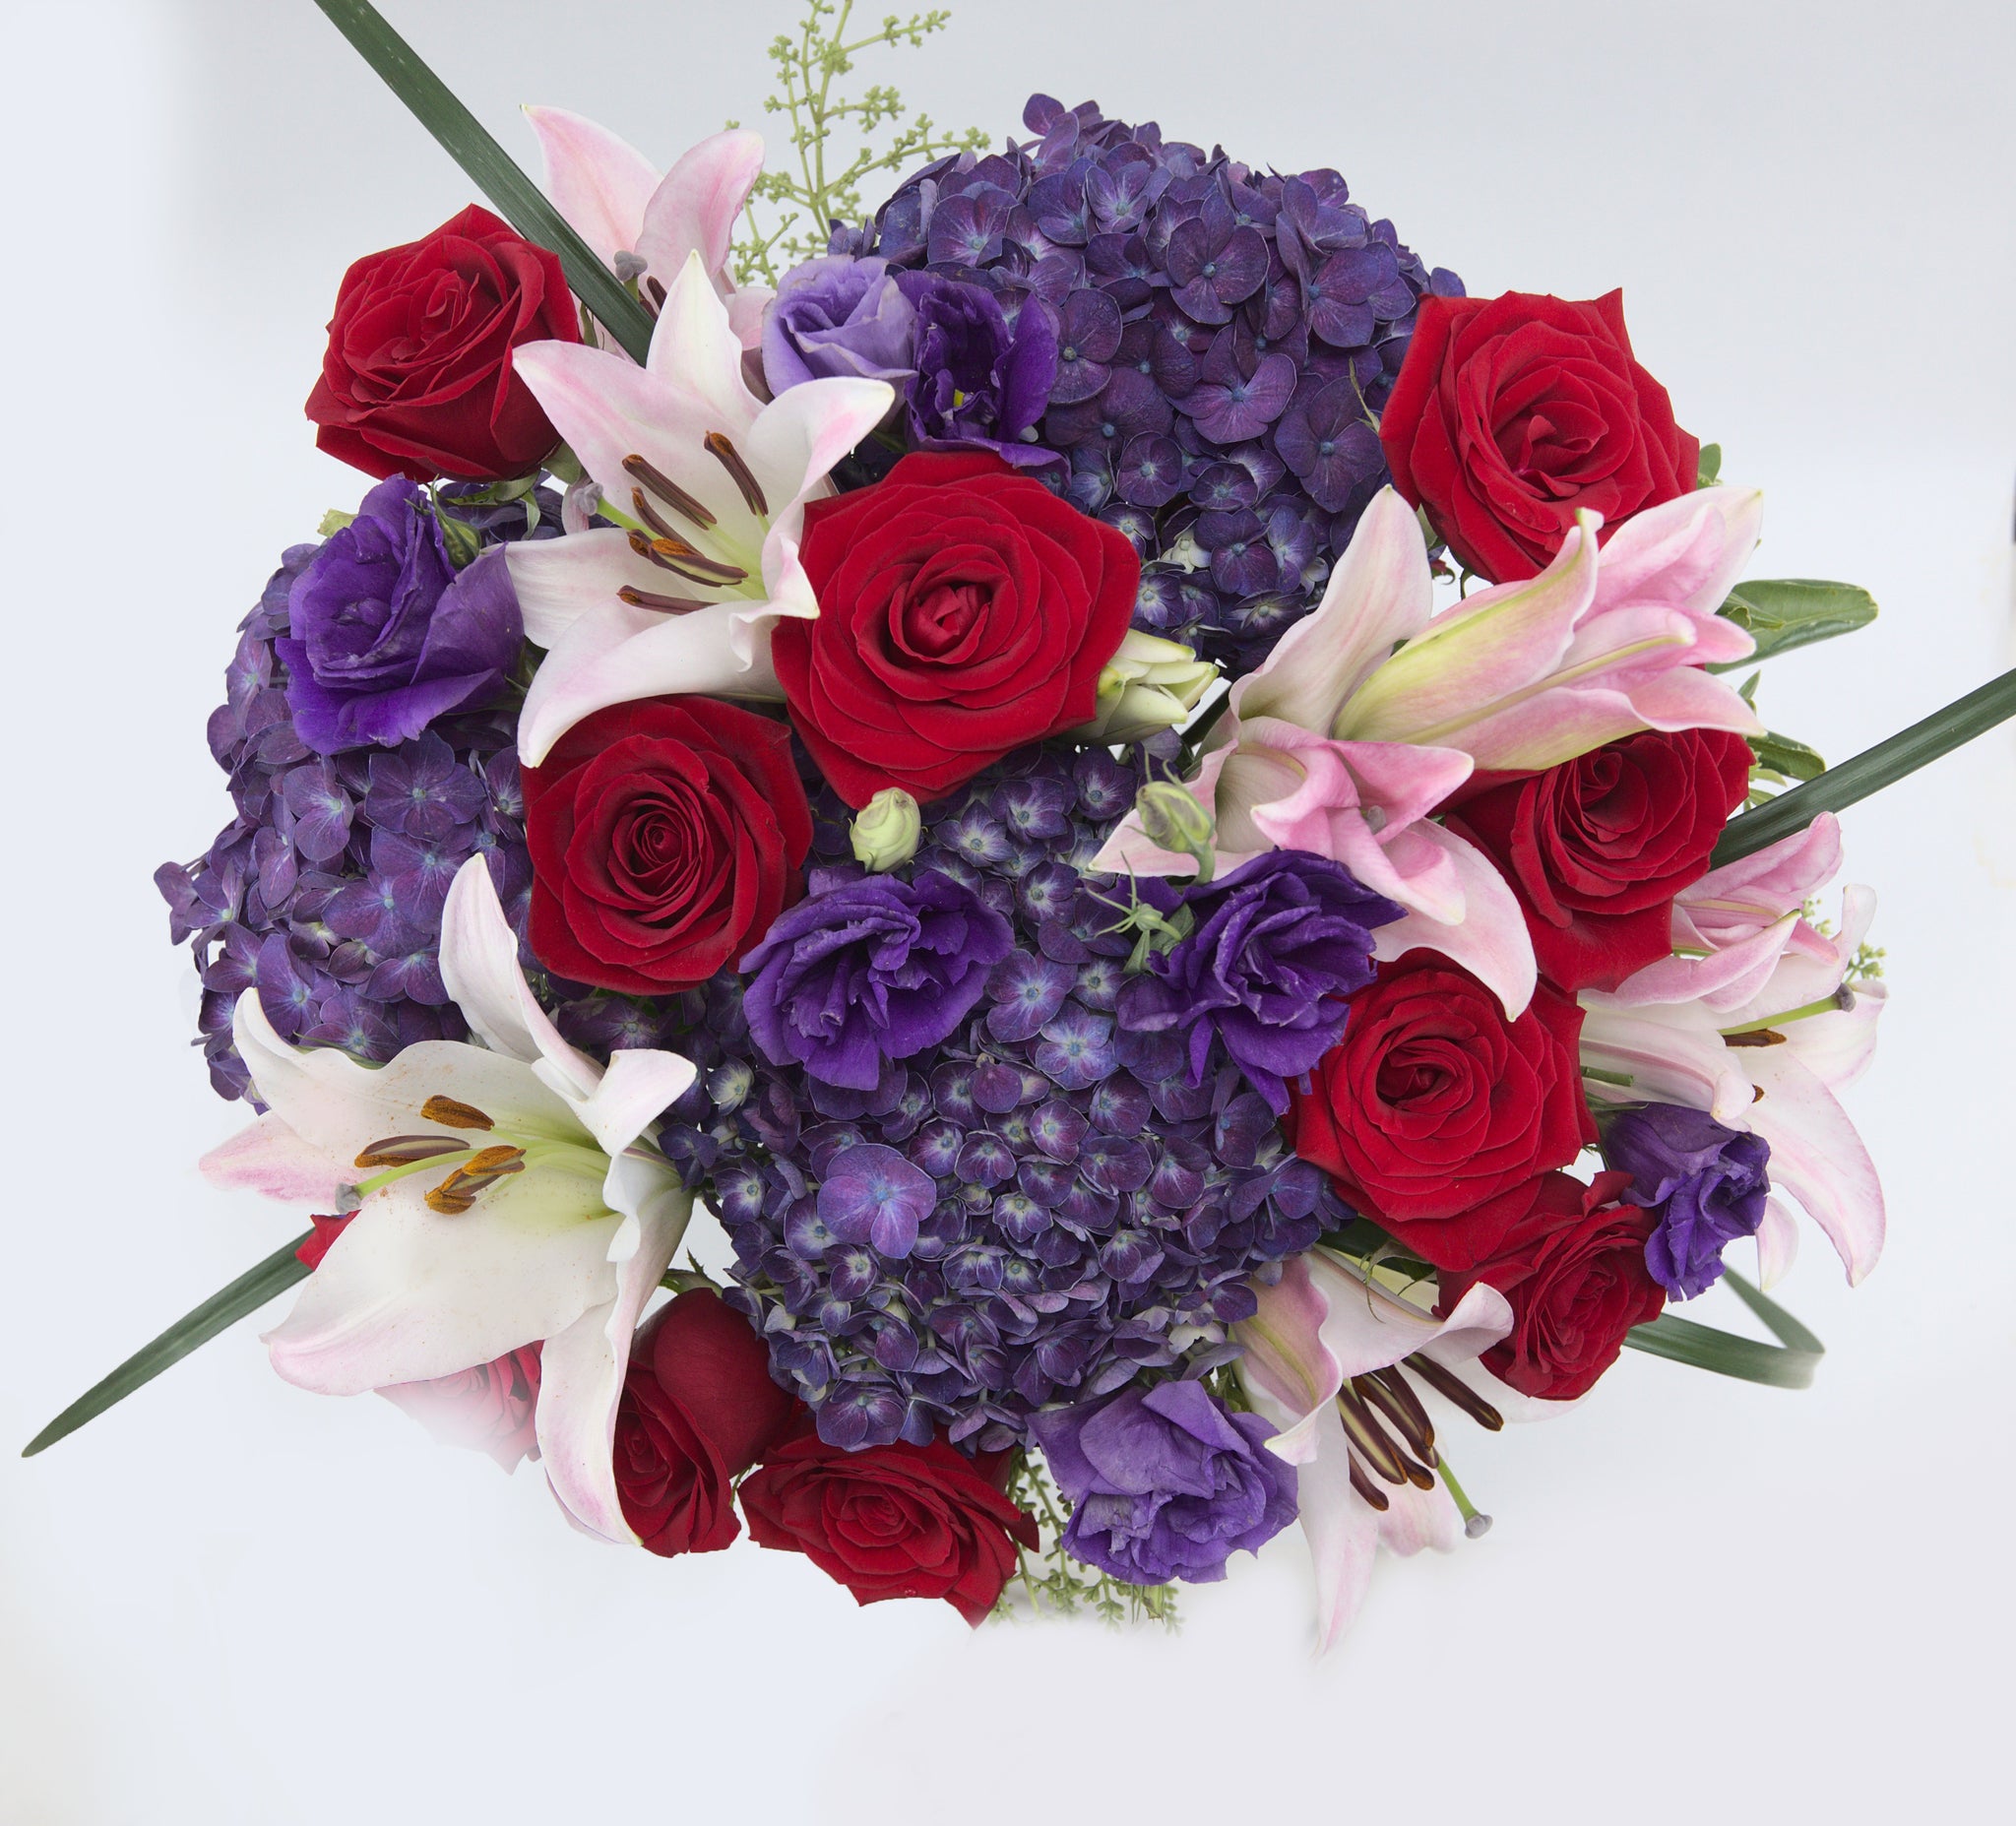 Love Shine Luxury Bouquet Top - vase of purple hydrangea, purple double lisianthus, red roses, pink roses, pink Asiatic Lilies, and lush greens